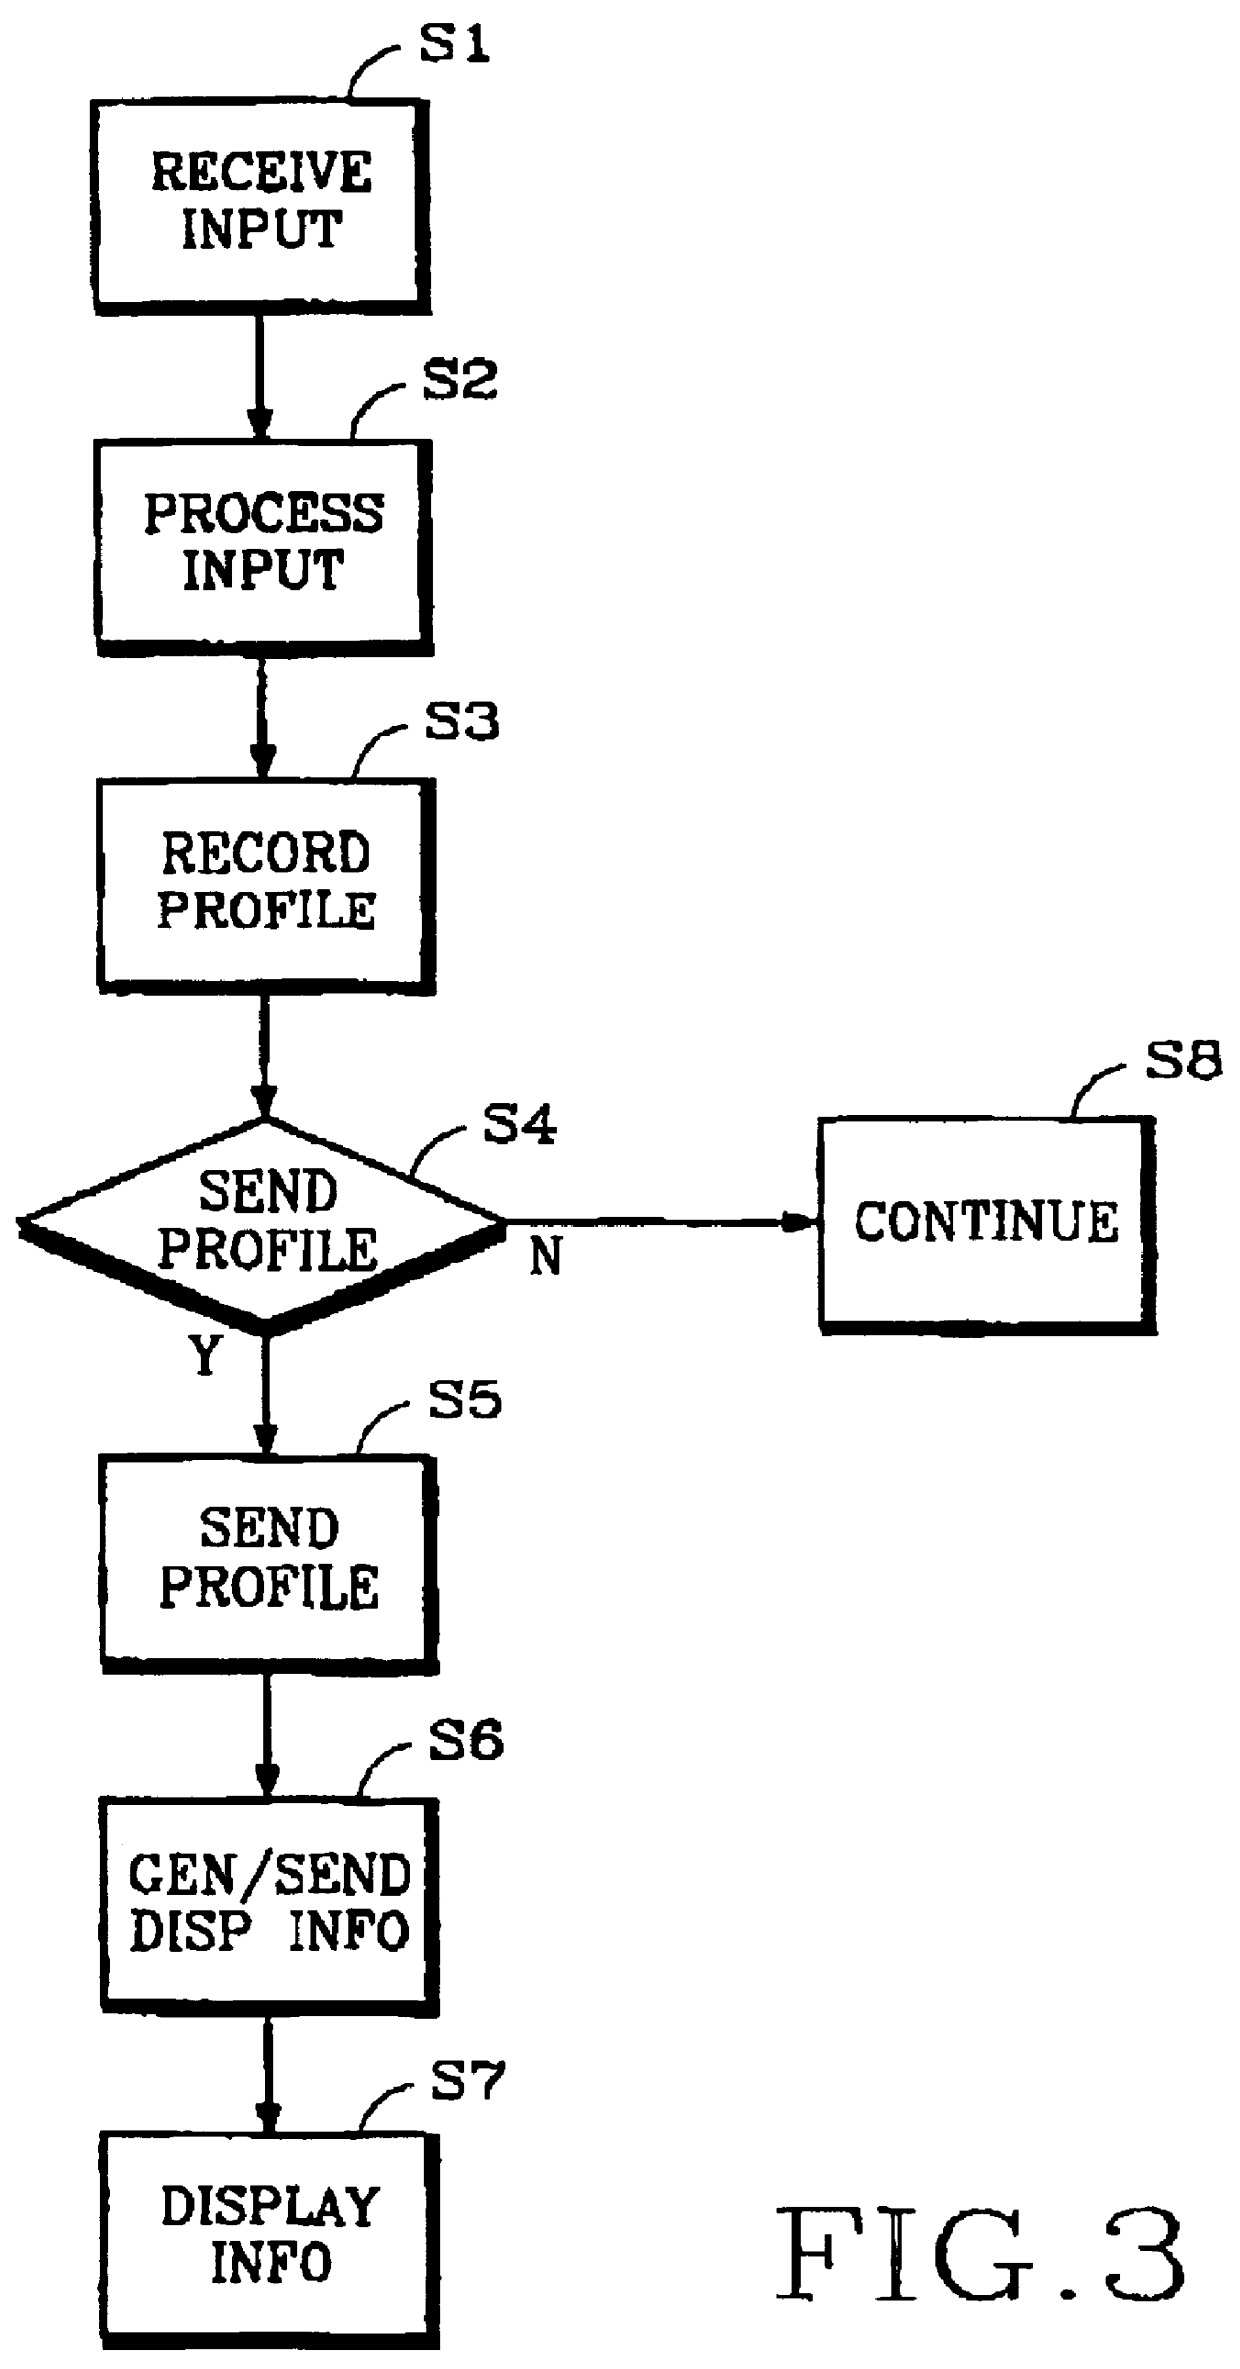 Method and apparatus for distributing over a network unsolicited information to a targeted audience